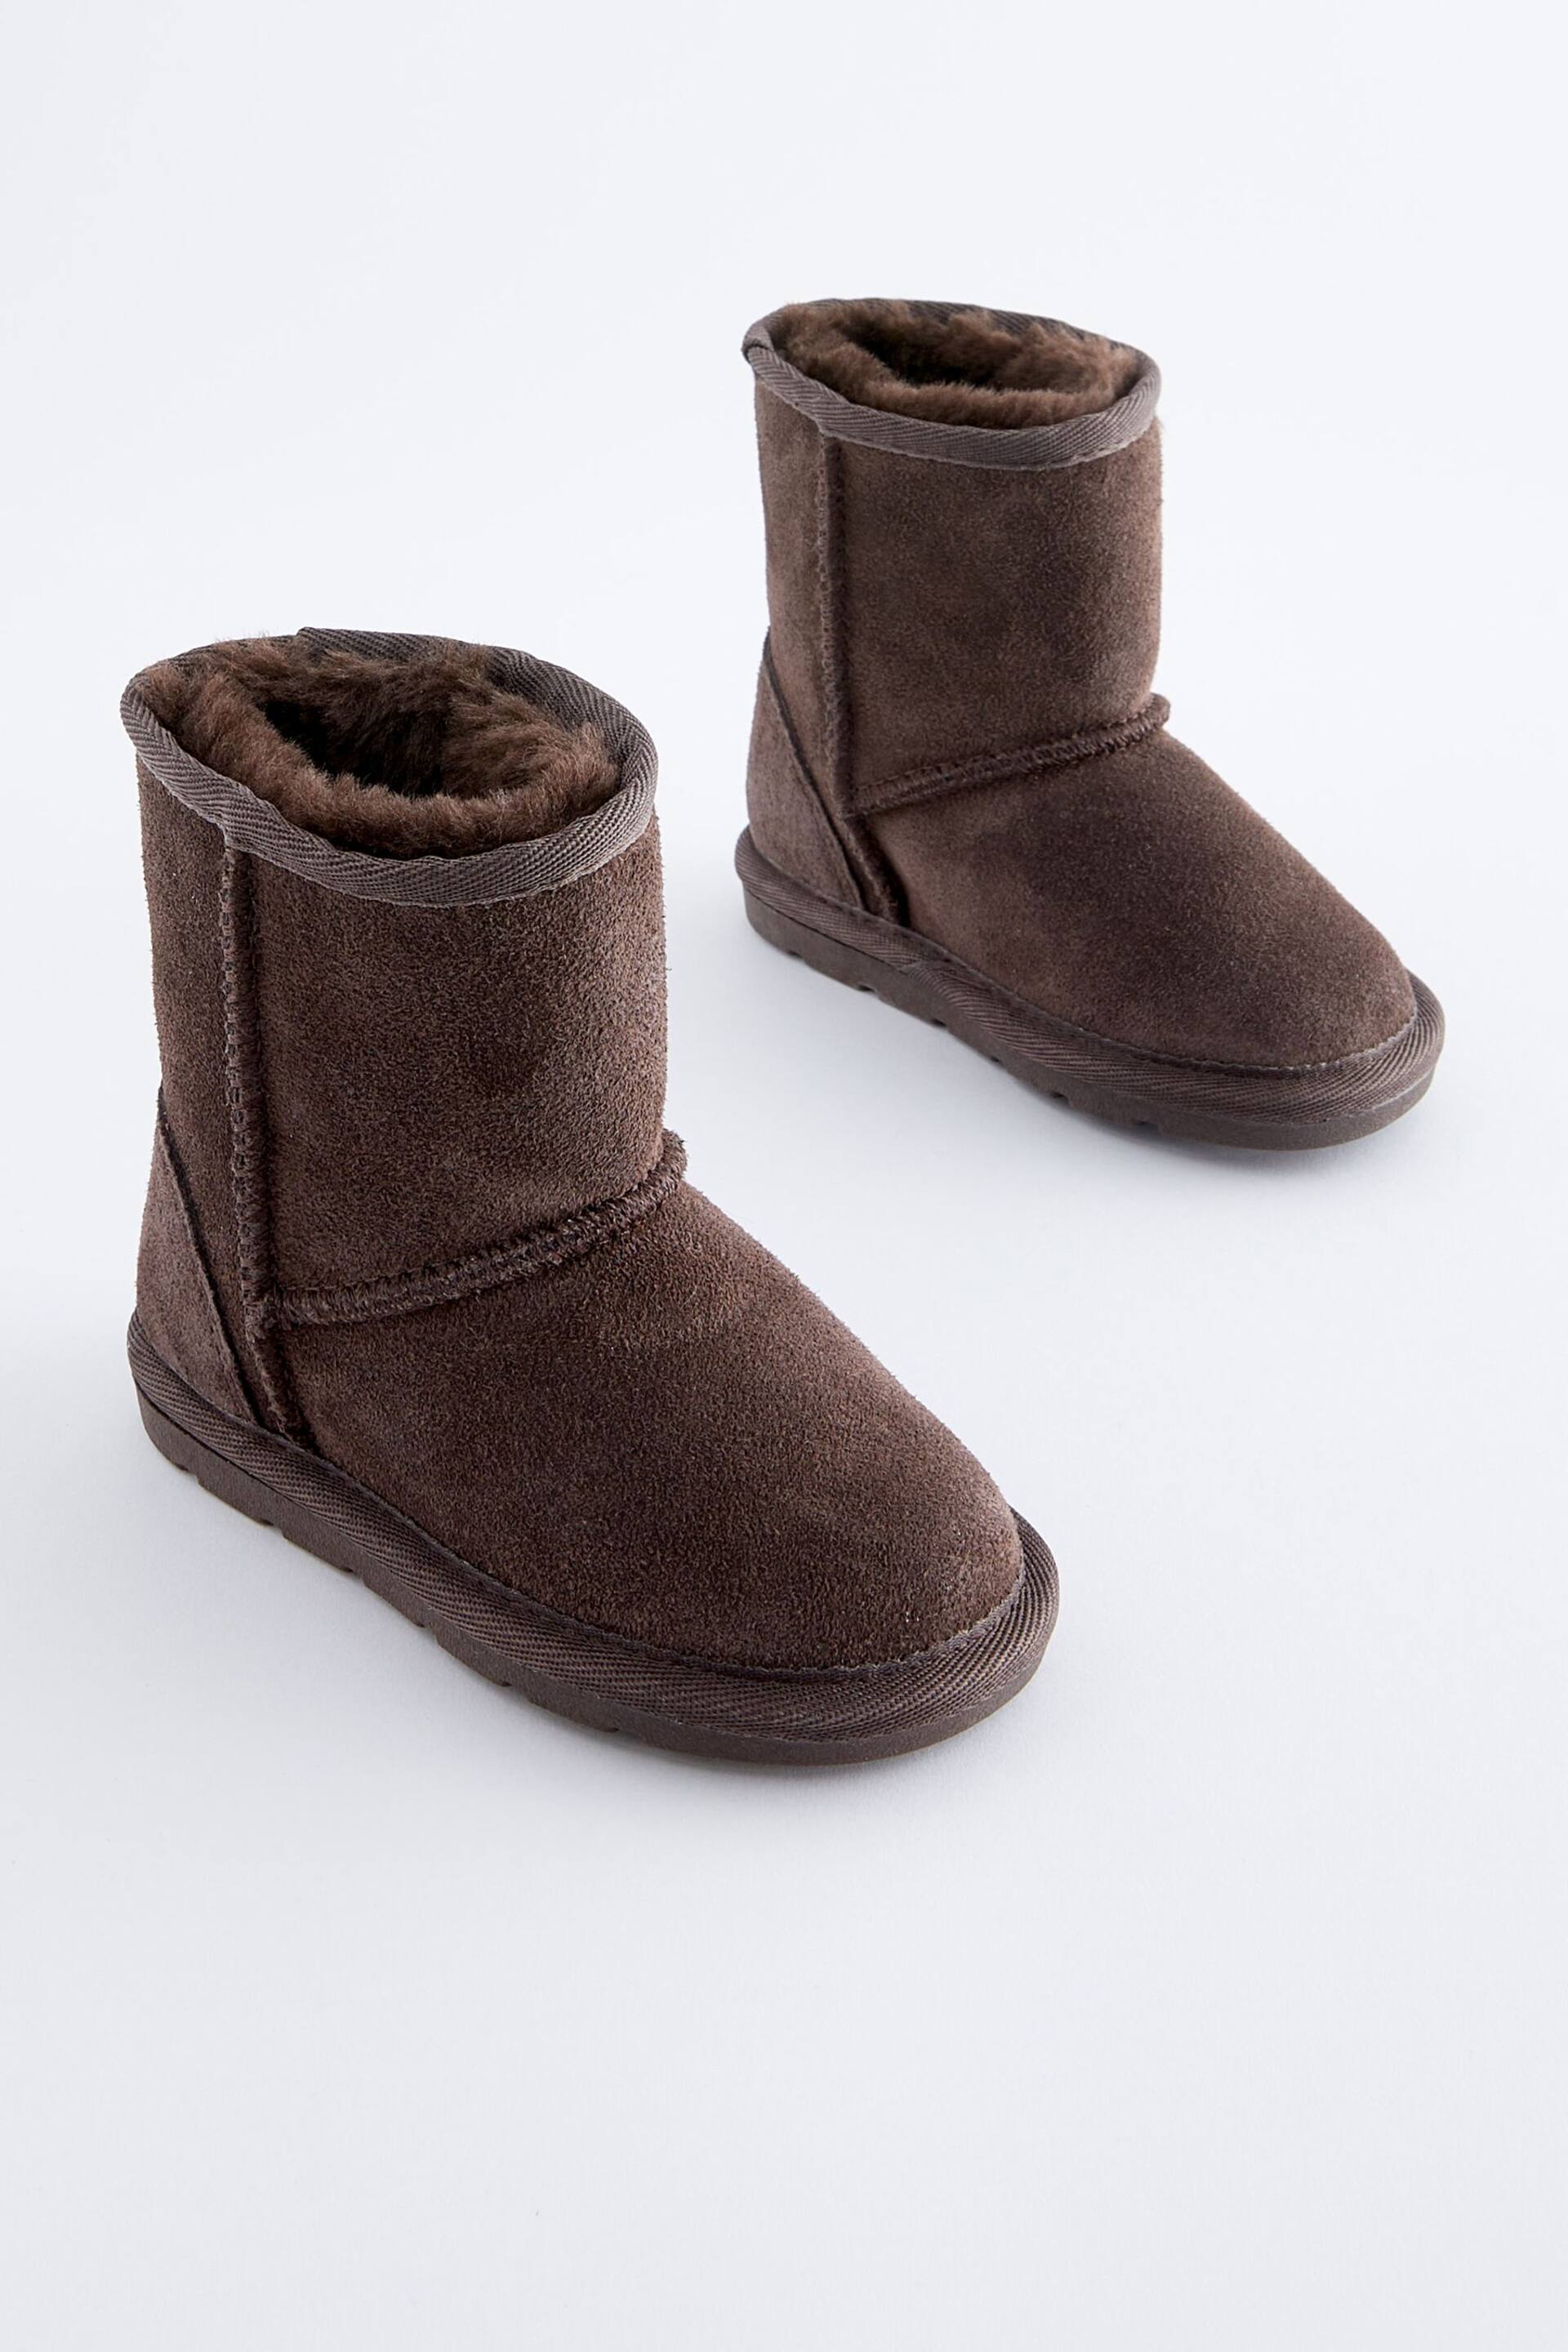 Chocolate Brown Short Suede Tall Faux Fur Lined Water Repellent Pull-On Suede Boots - Image 1 of 5